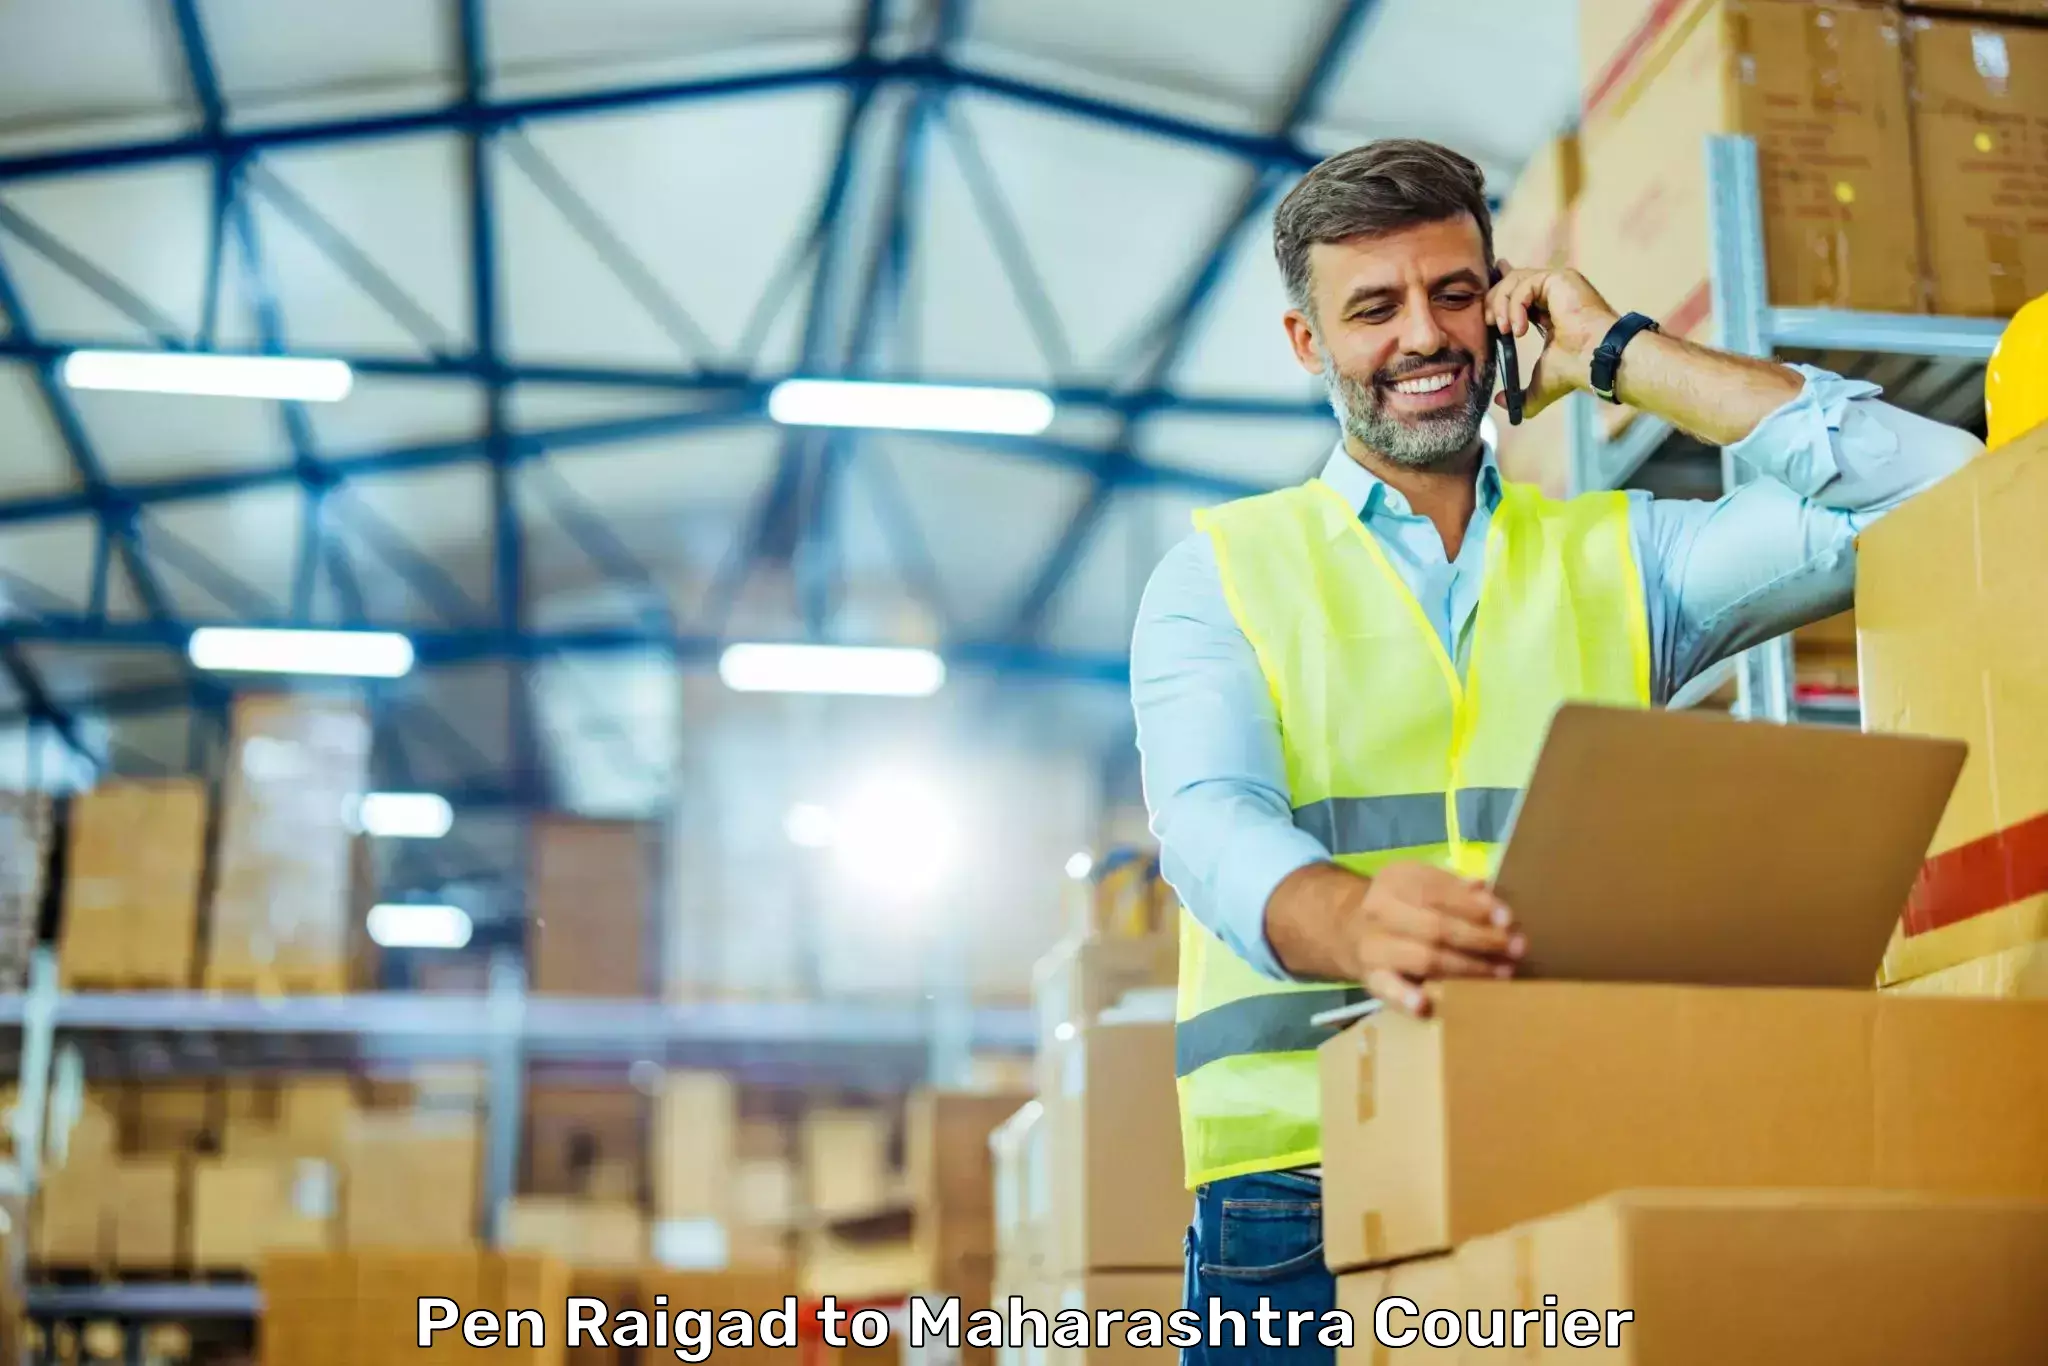 Personal parcel delivery in Pen Raigad to Mahabaleshwar